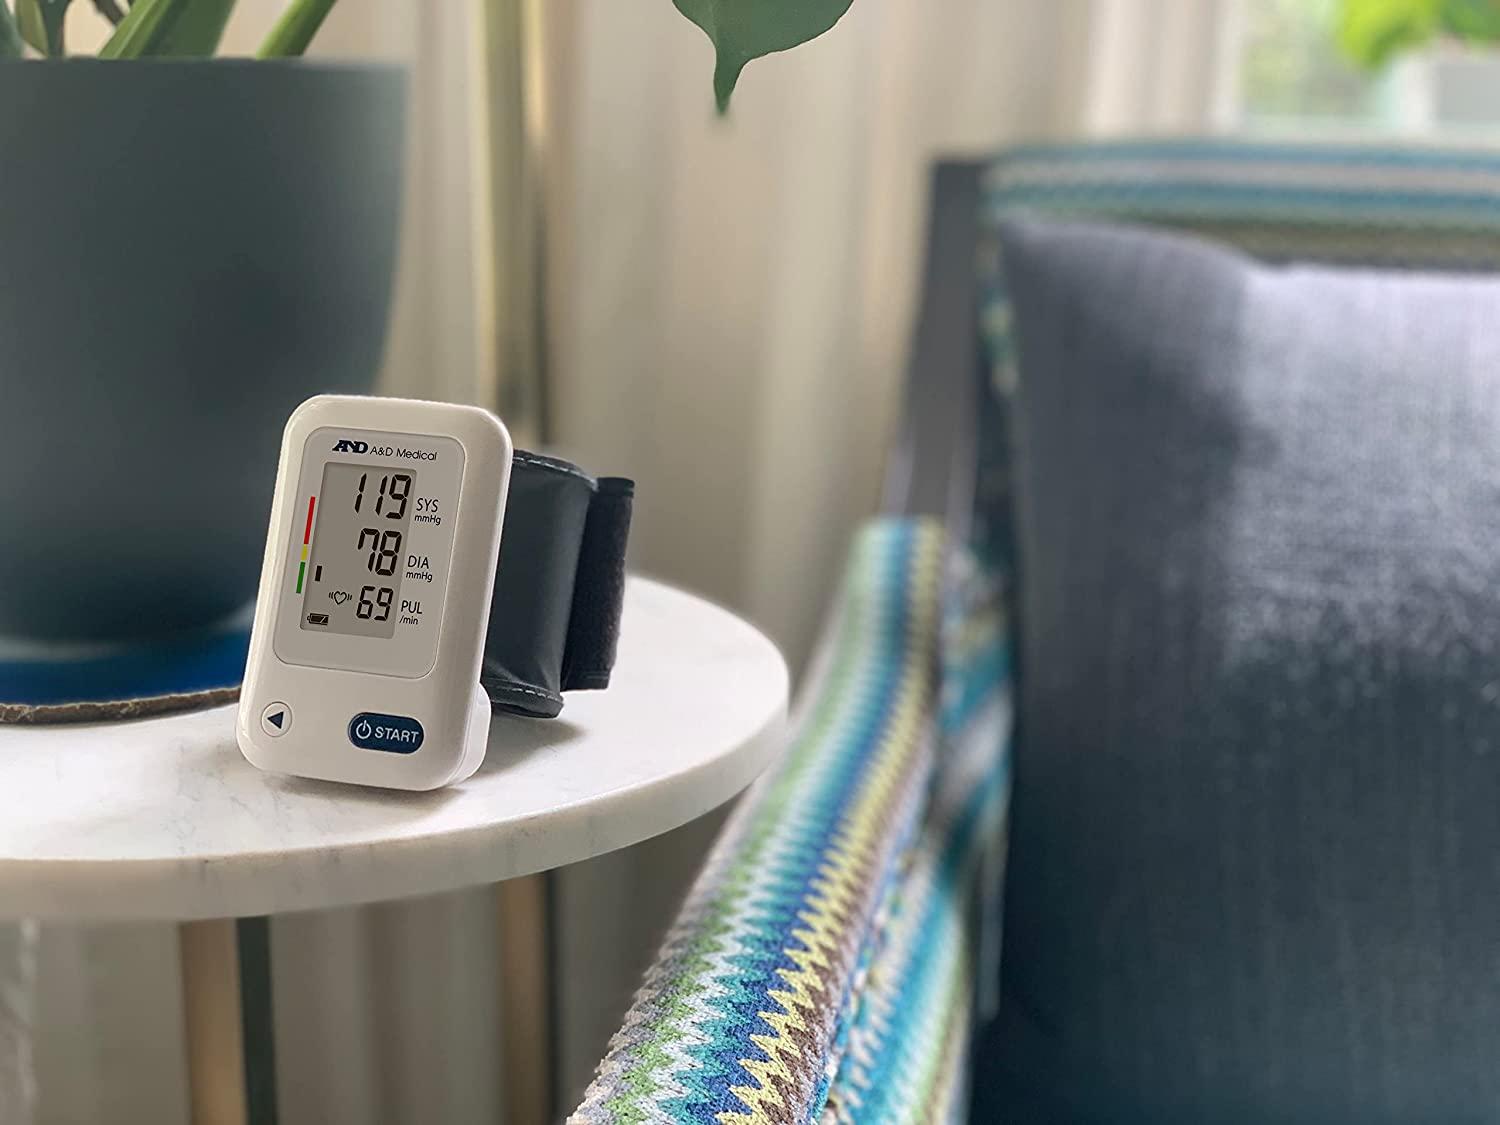 Are Wrist Blood Pressure Monitors Accurate? - A&D Medical